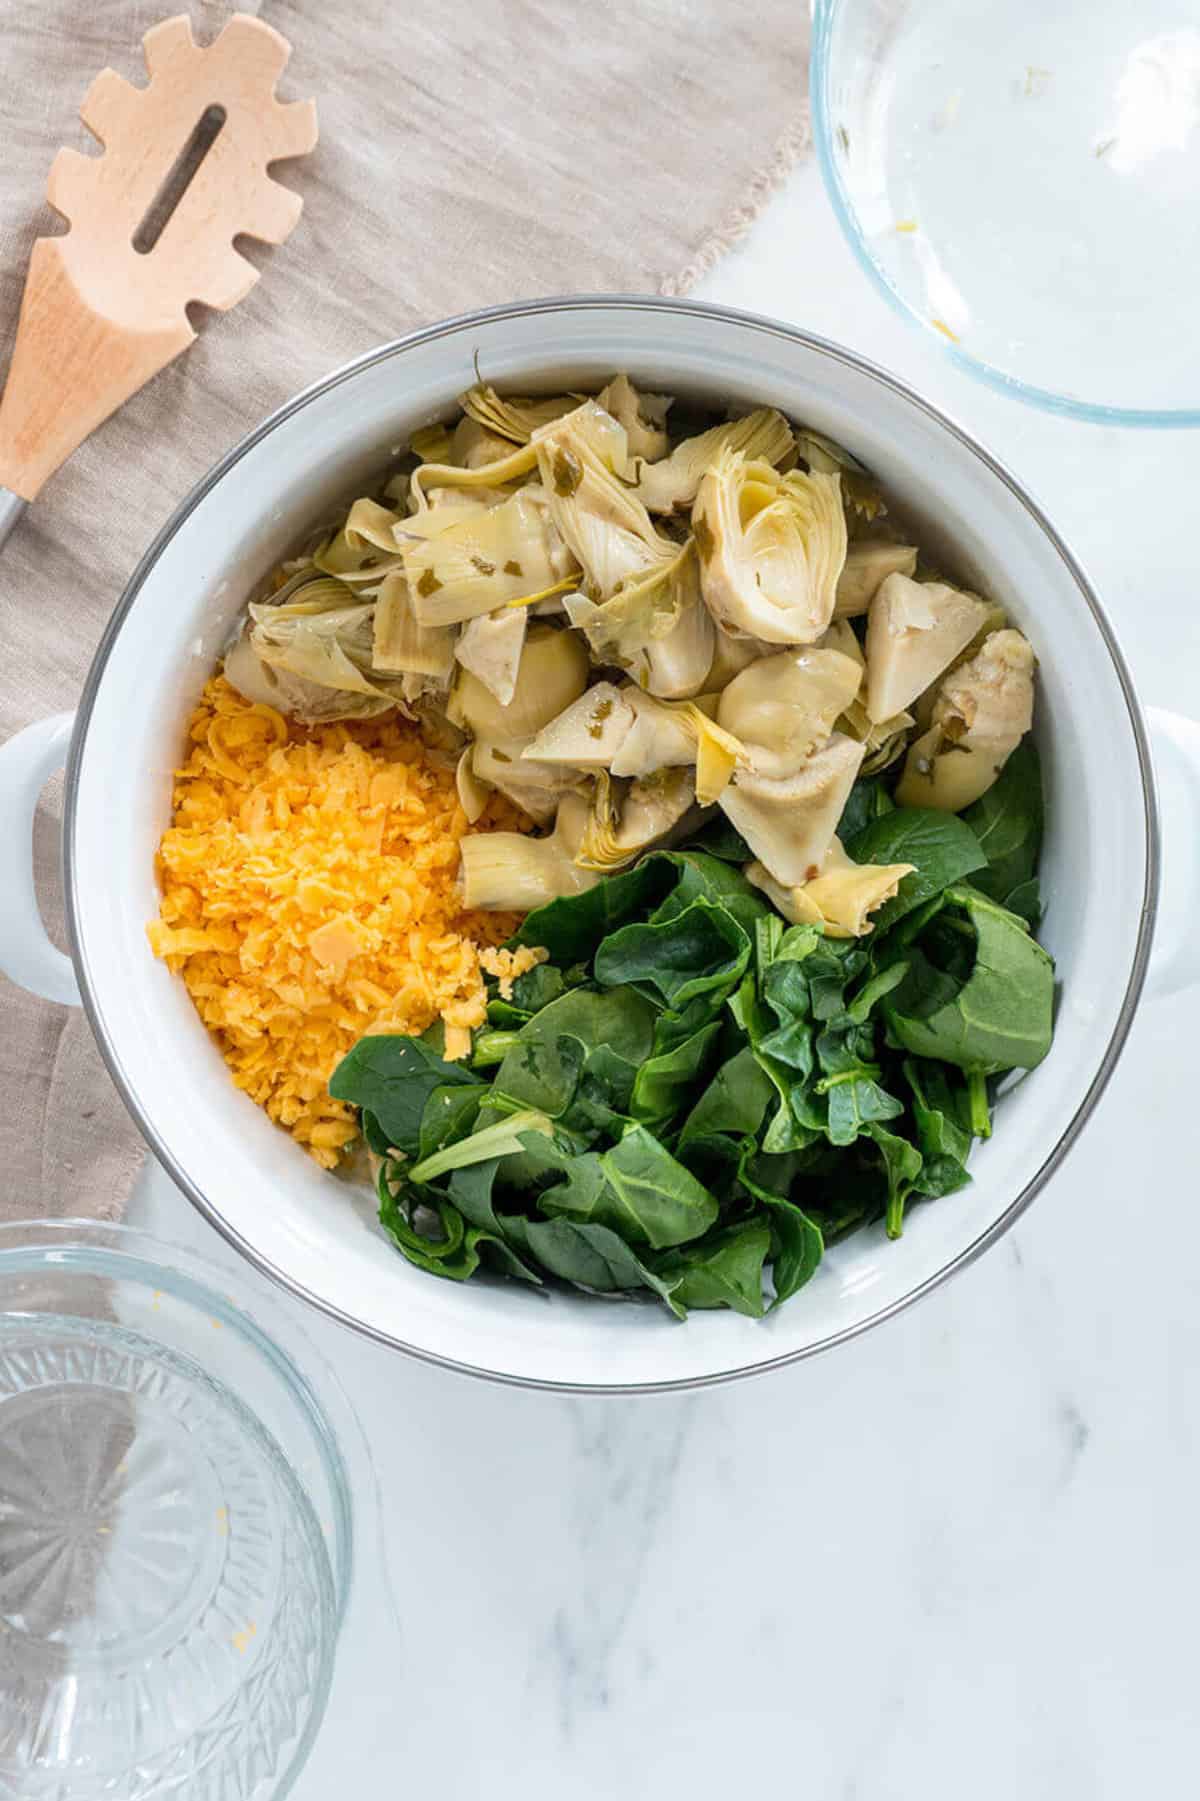 cheese, artichoke, and spinach in a bowl.